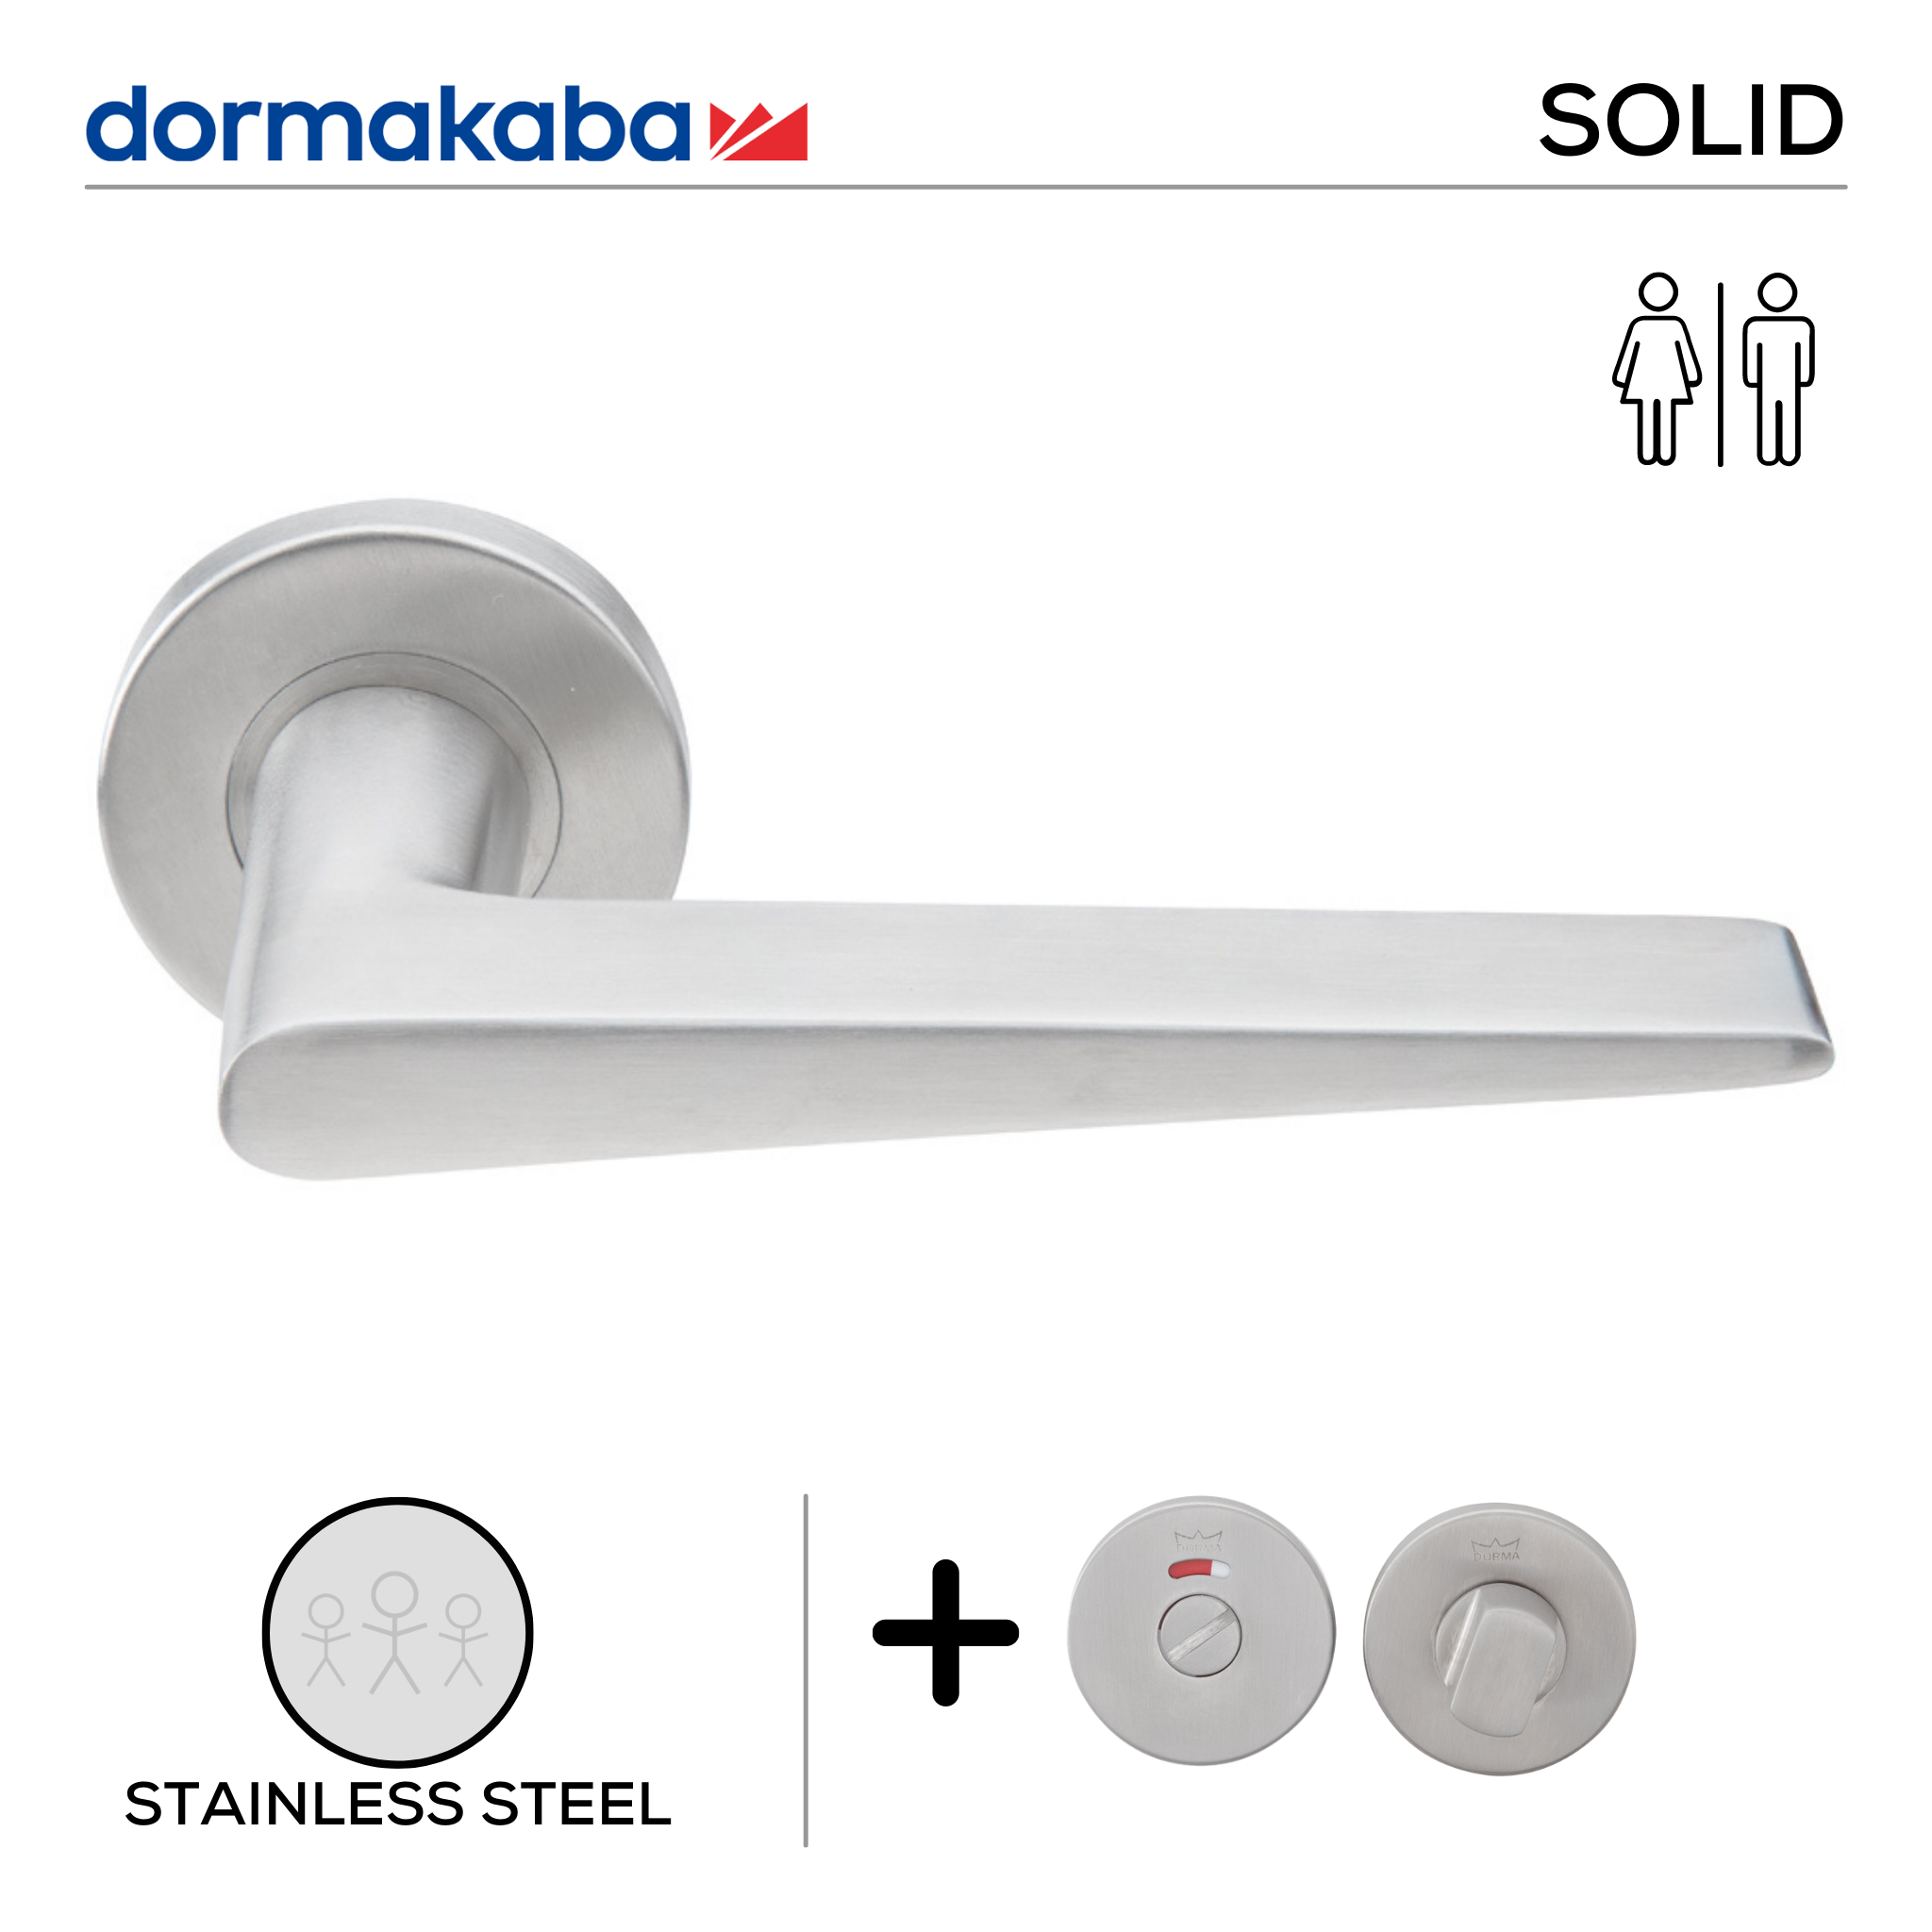 SH 821 Bathroom W/C, Lever Handles, Solid, On Round Rose, With Bathroom (WC) Indicator Set - DWC 005, 143mm (l), Stainless Steel, DORMAKABA